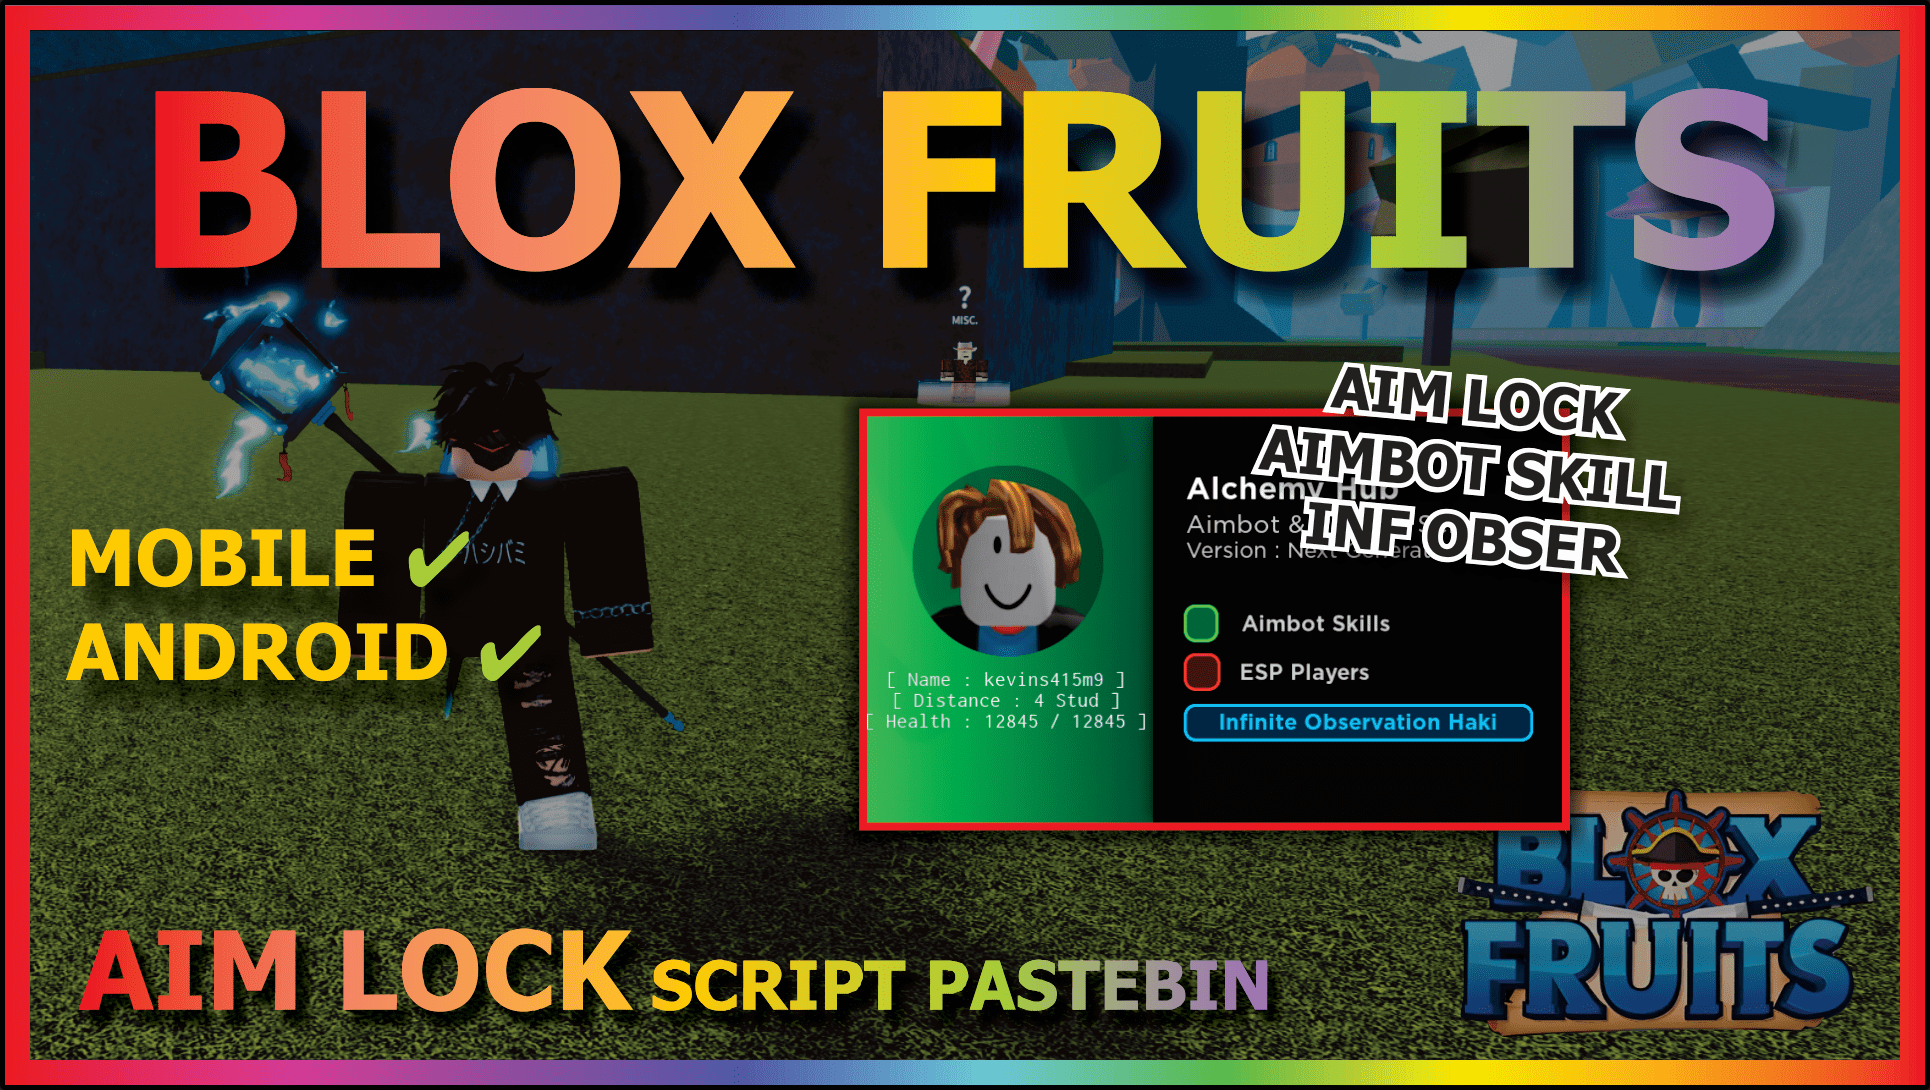 You are currently viewing BLOX FRUITS (AIM LOCK)